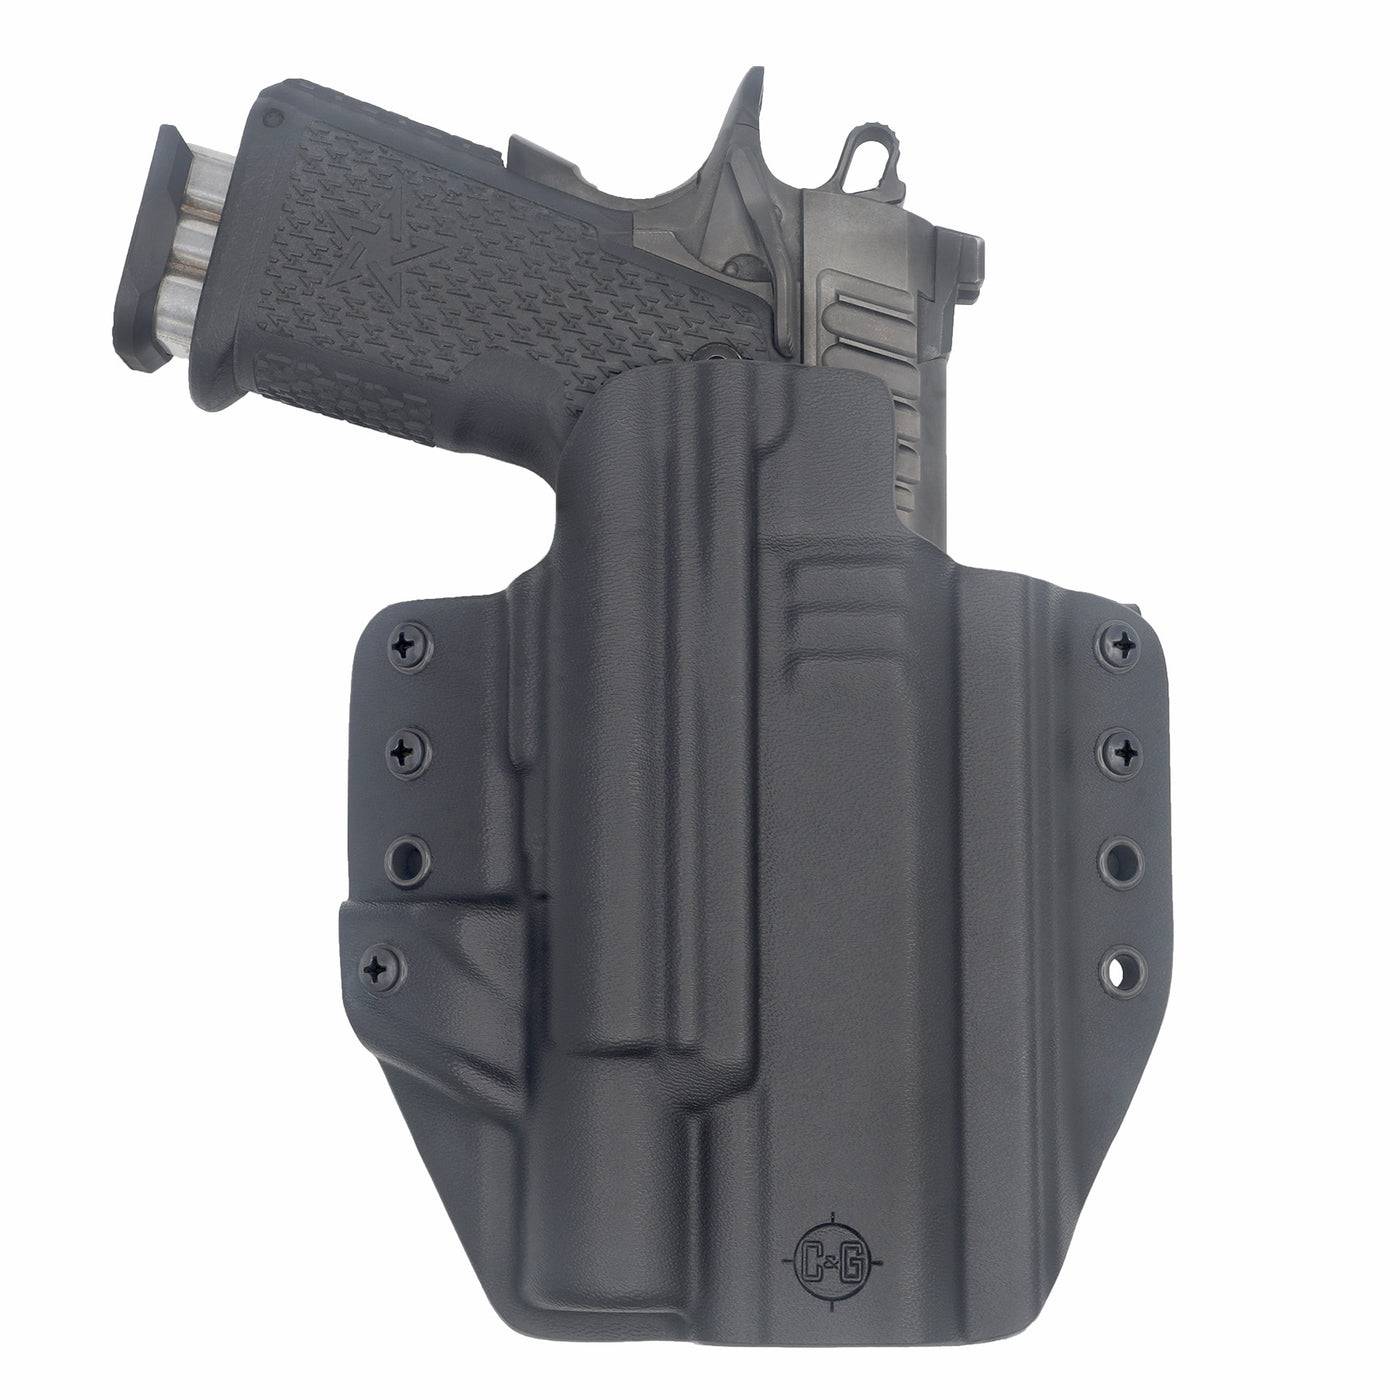 C&G Holsters Quickship OWB Tactical 1911 Surefire X300 in holstered position